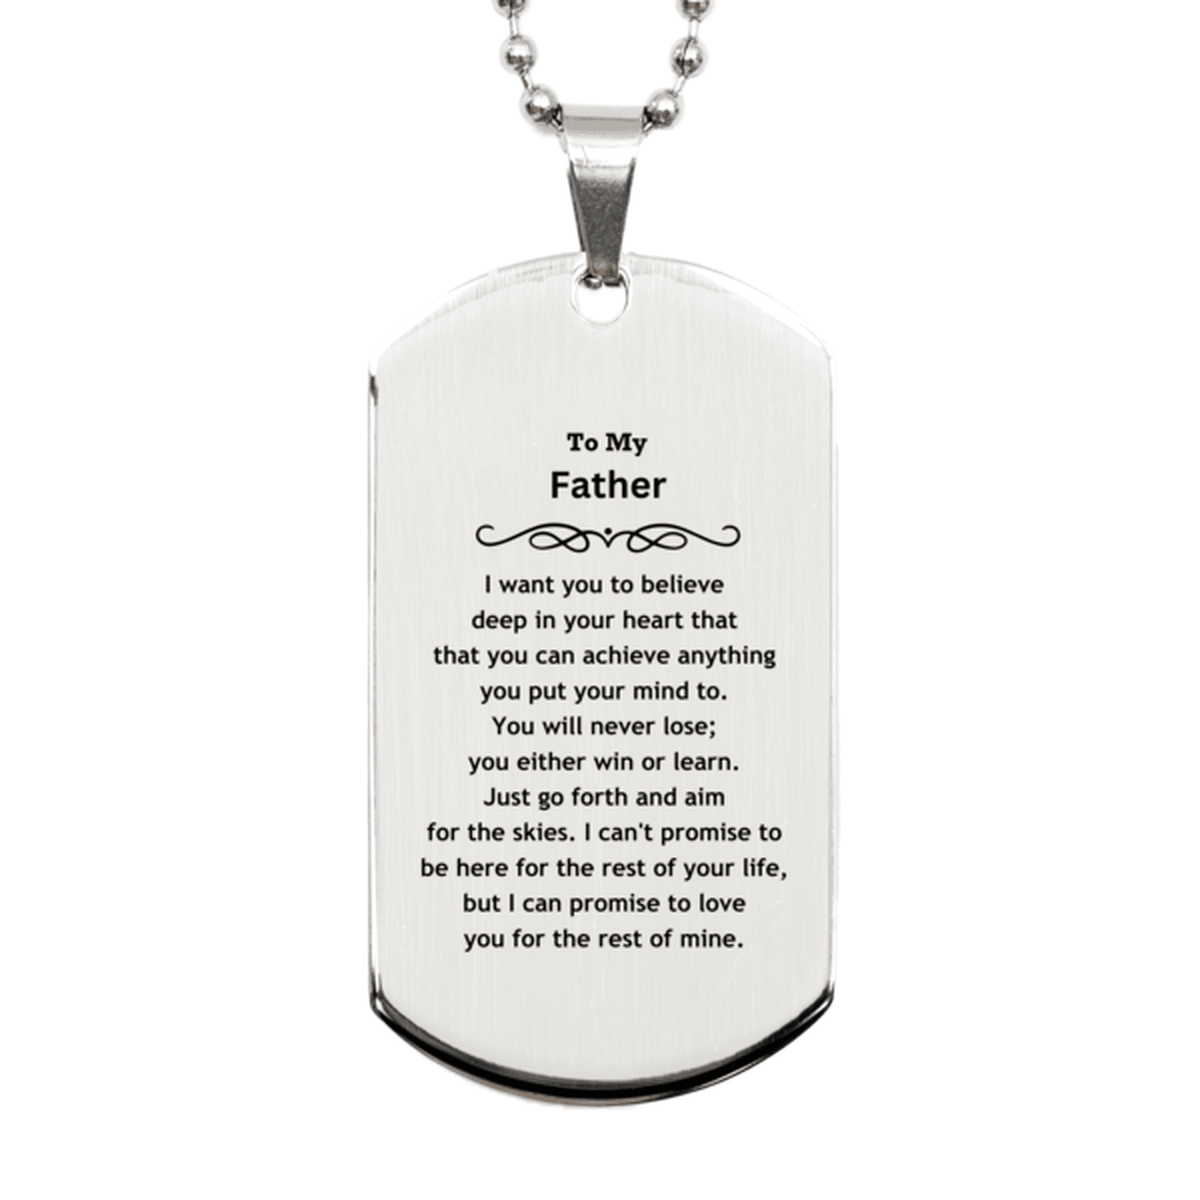 Motivational Father Silver Dog Tag Engraved Necklace, I can promise to love you for the rest of my life, Birthday Christmas Jewelry Gift - Mallard Moon Gift Shop